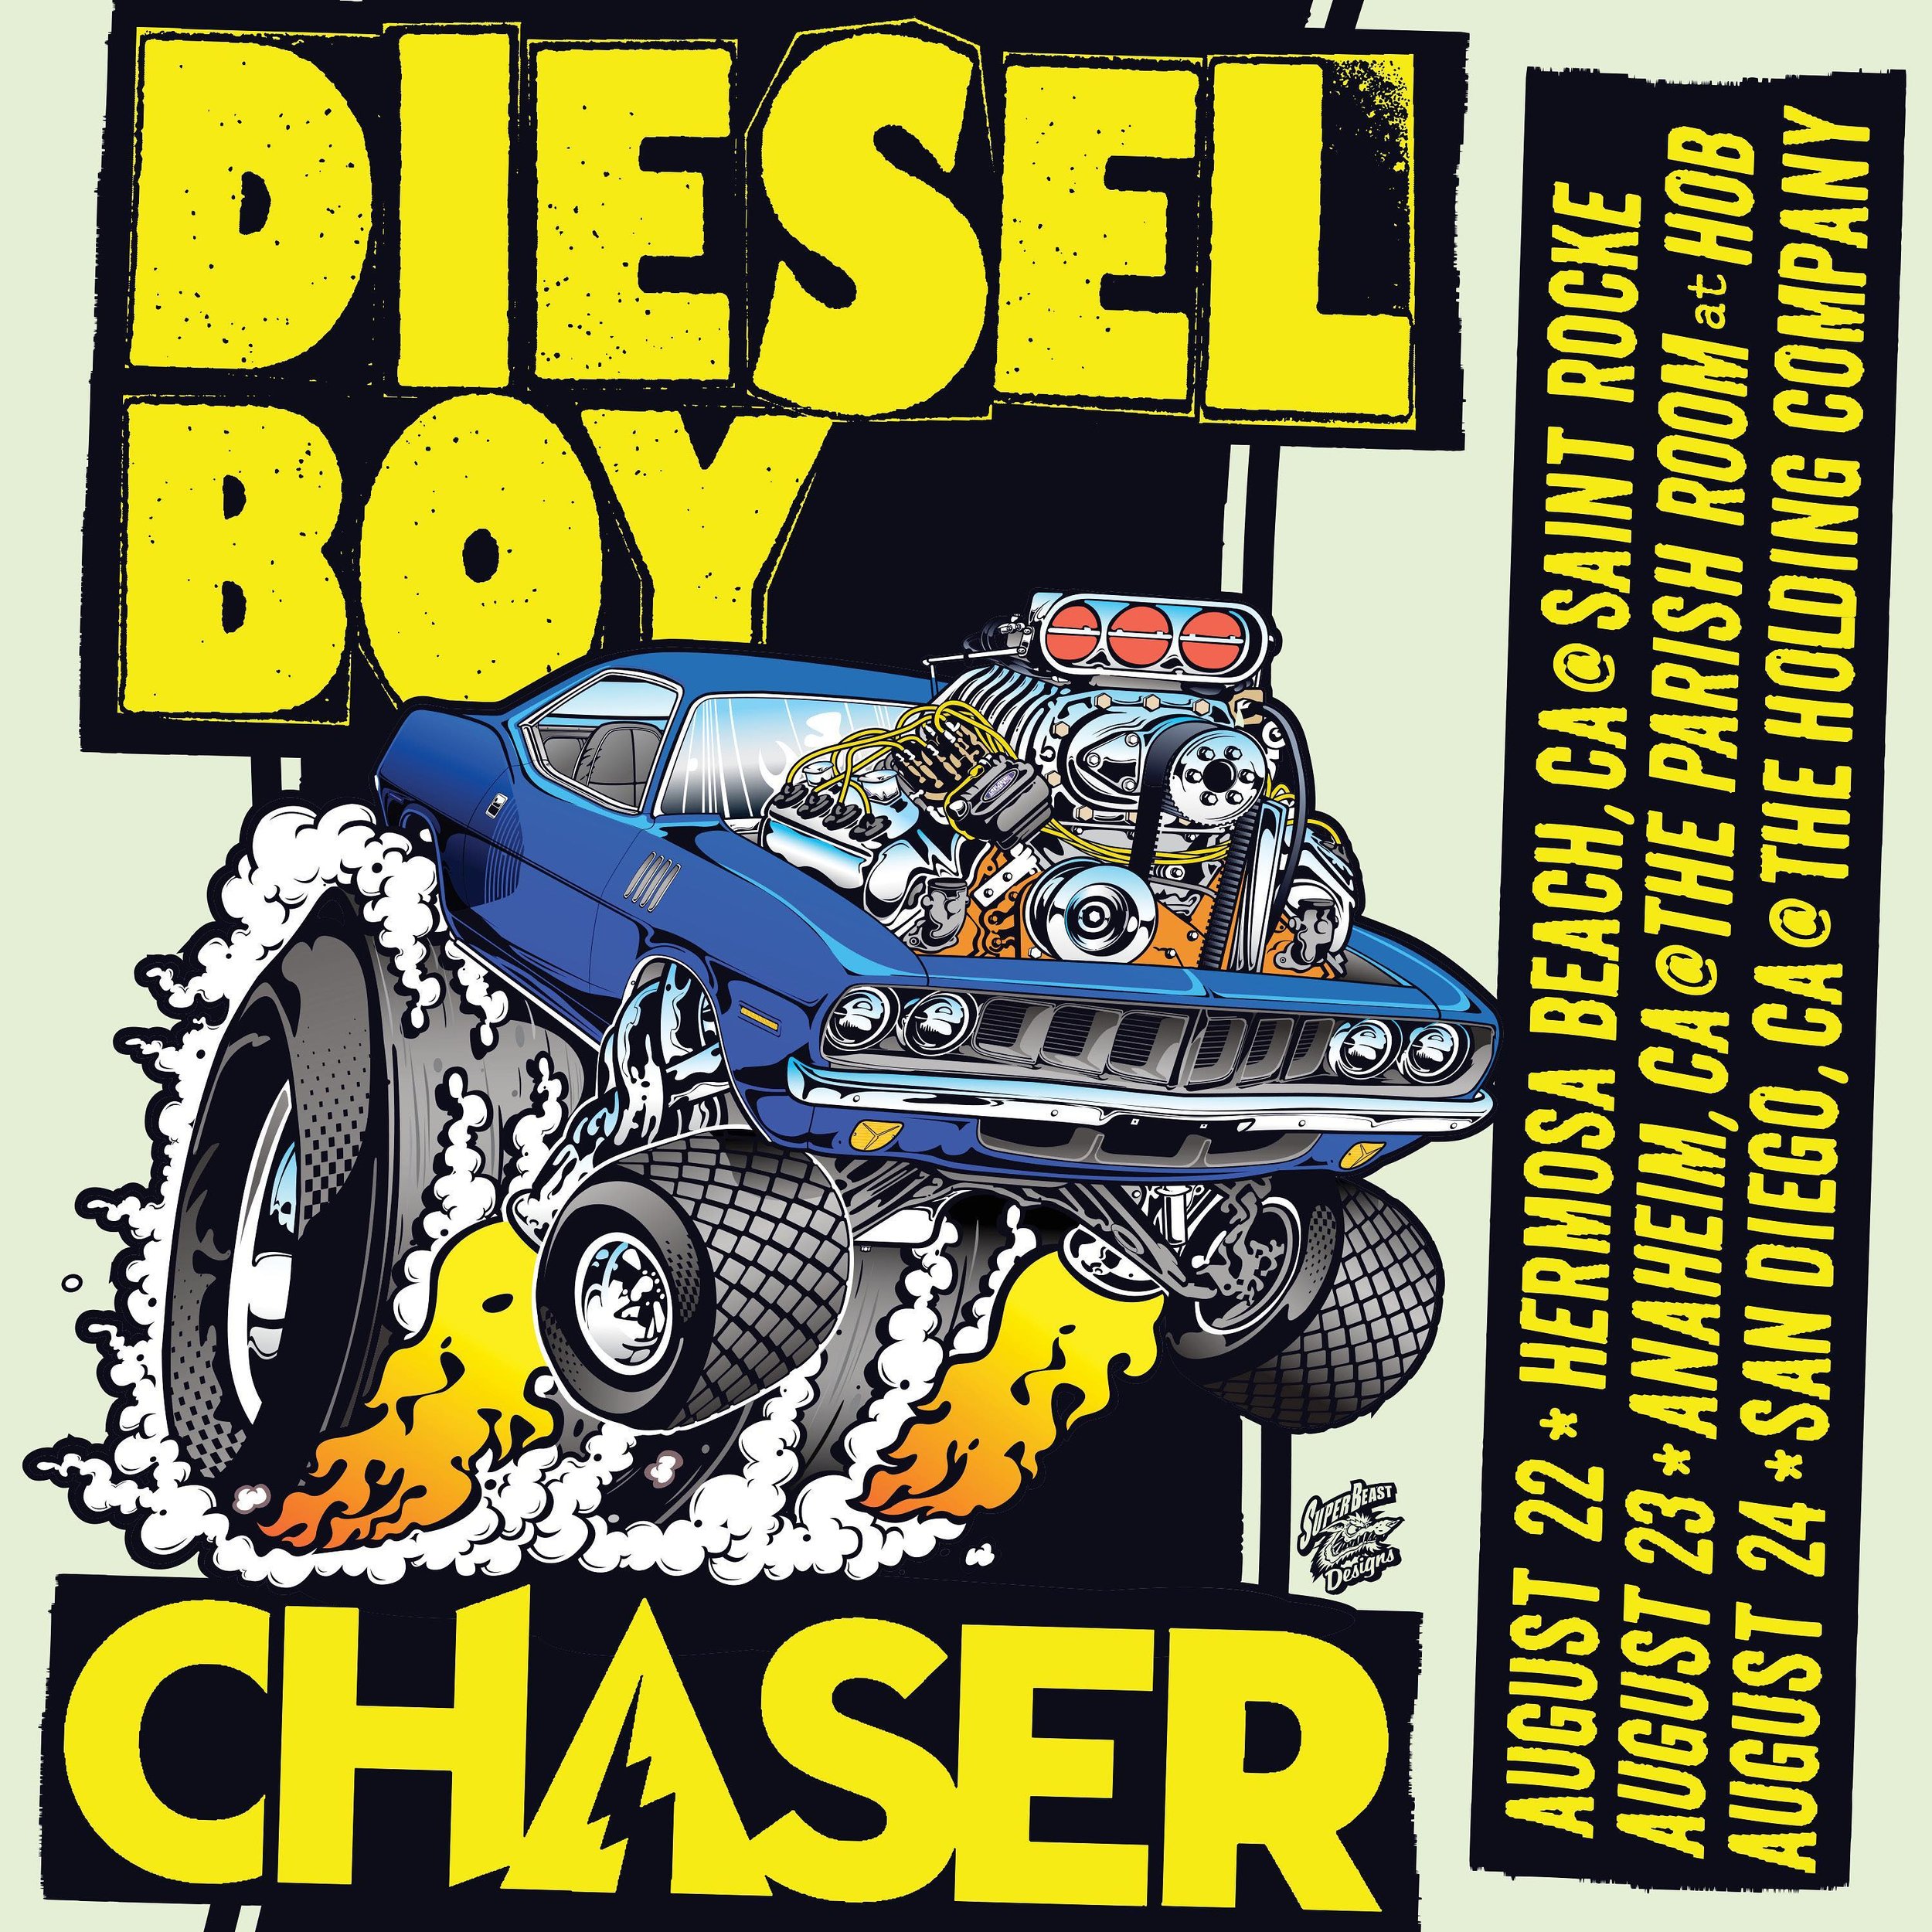 Hear ye, hear ye &mdash; rev your engines because tickets for our SoCal weekender with @chaserpunk are all officially on sale now. These are gonna super rad! Dates are below. Hit diesel-boy.com for info and ticket links.

August 22: Hermosa Beach, CA